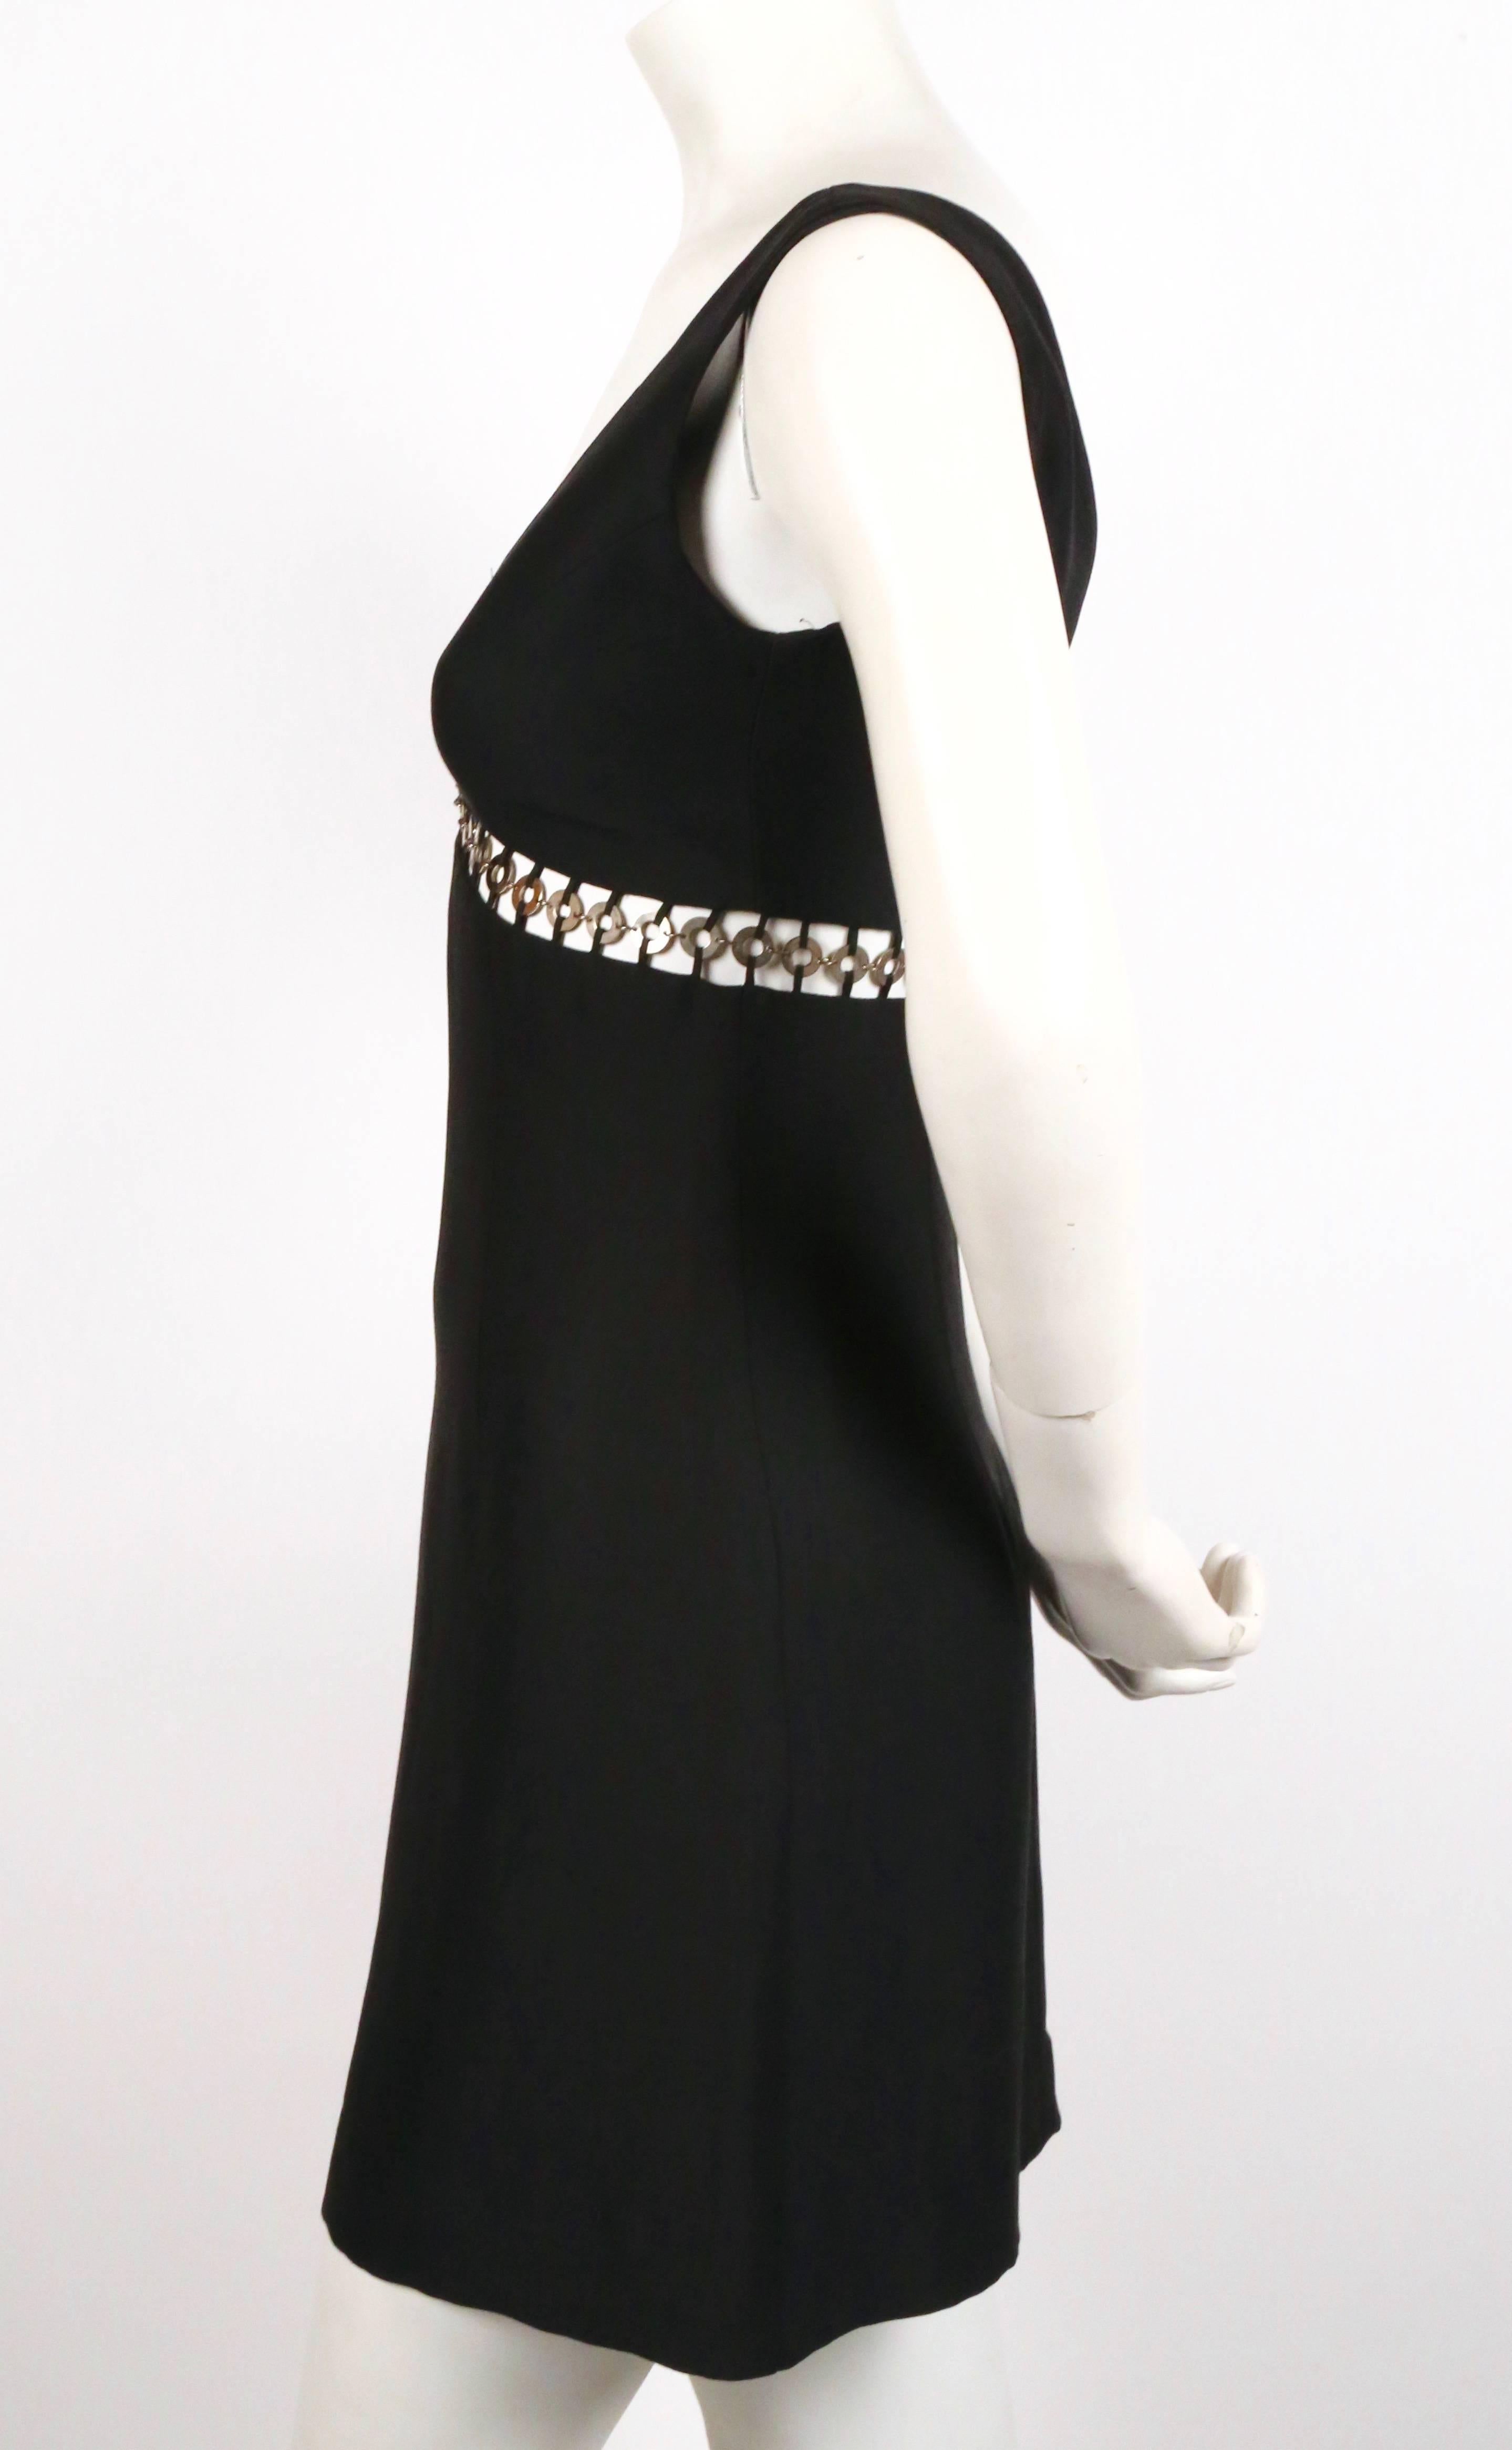 Black 1990's SOPHIE SITBON black mini dress with cut out and silver rings